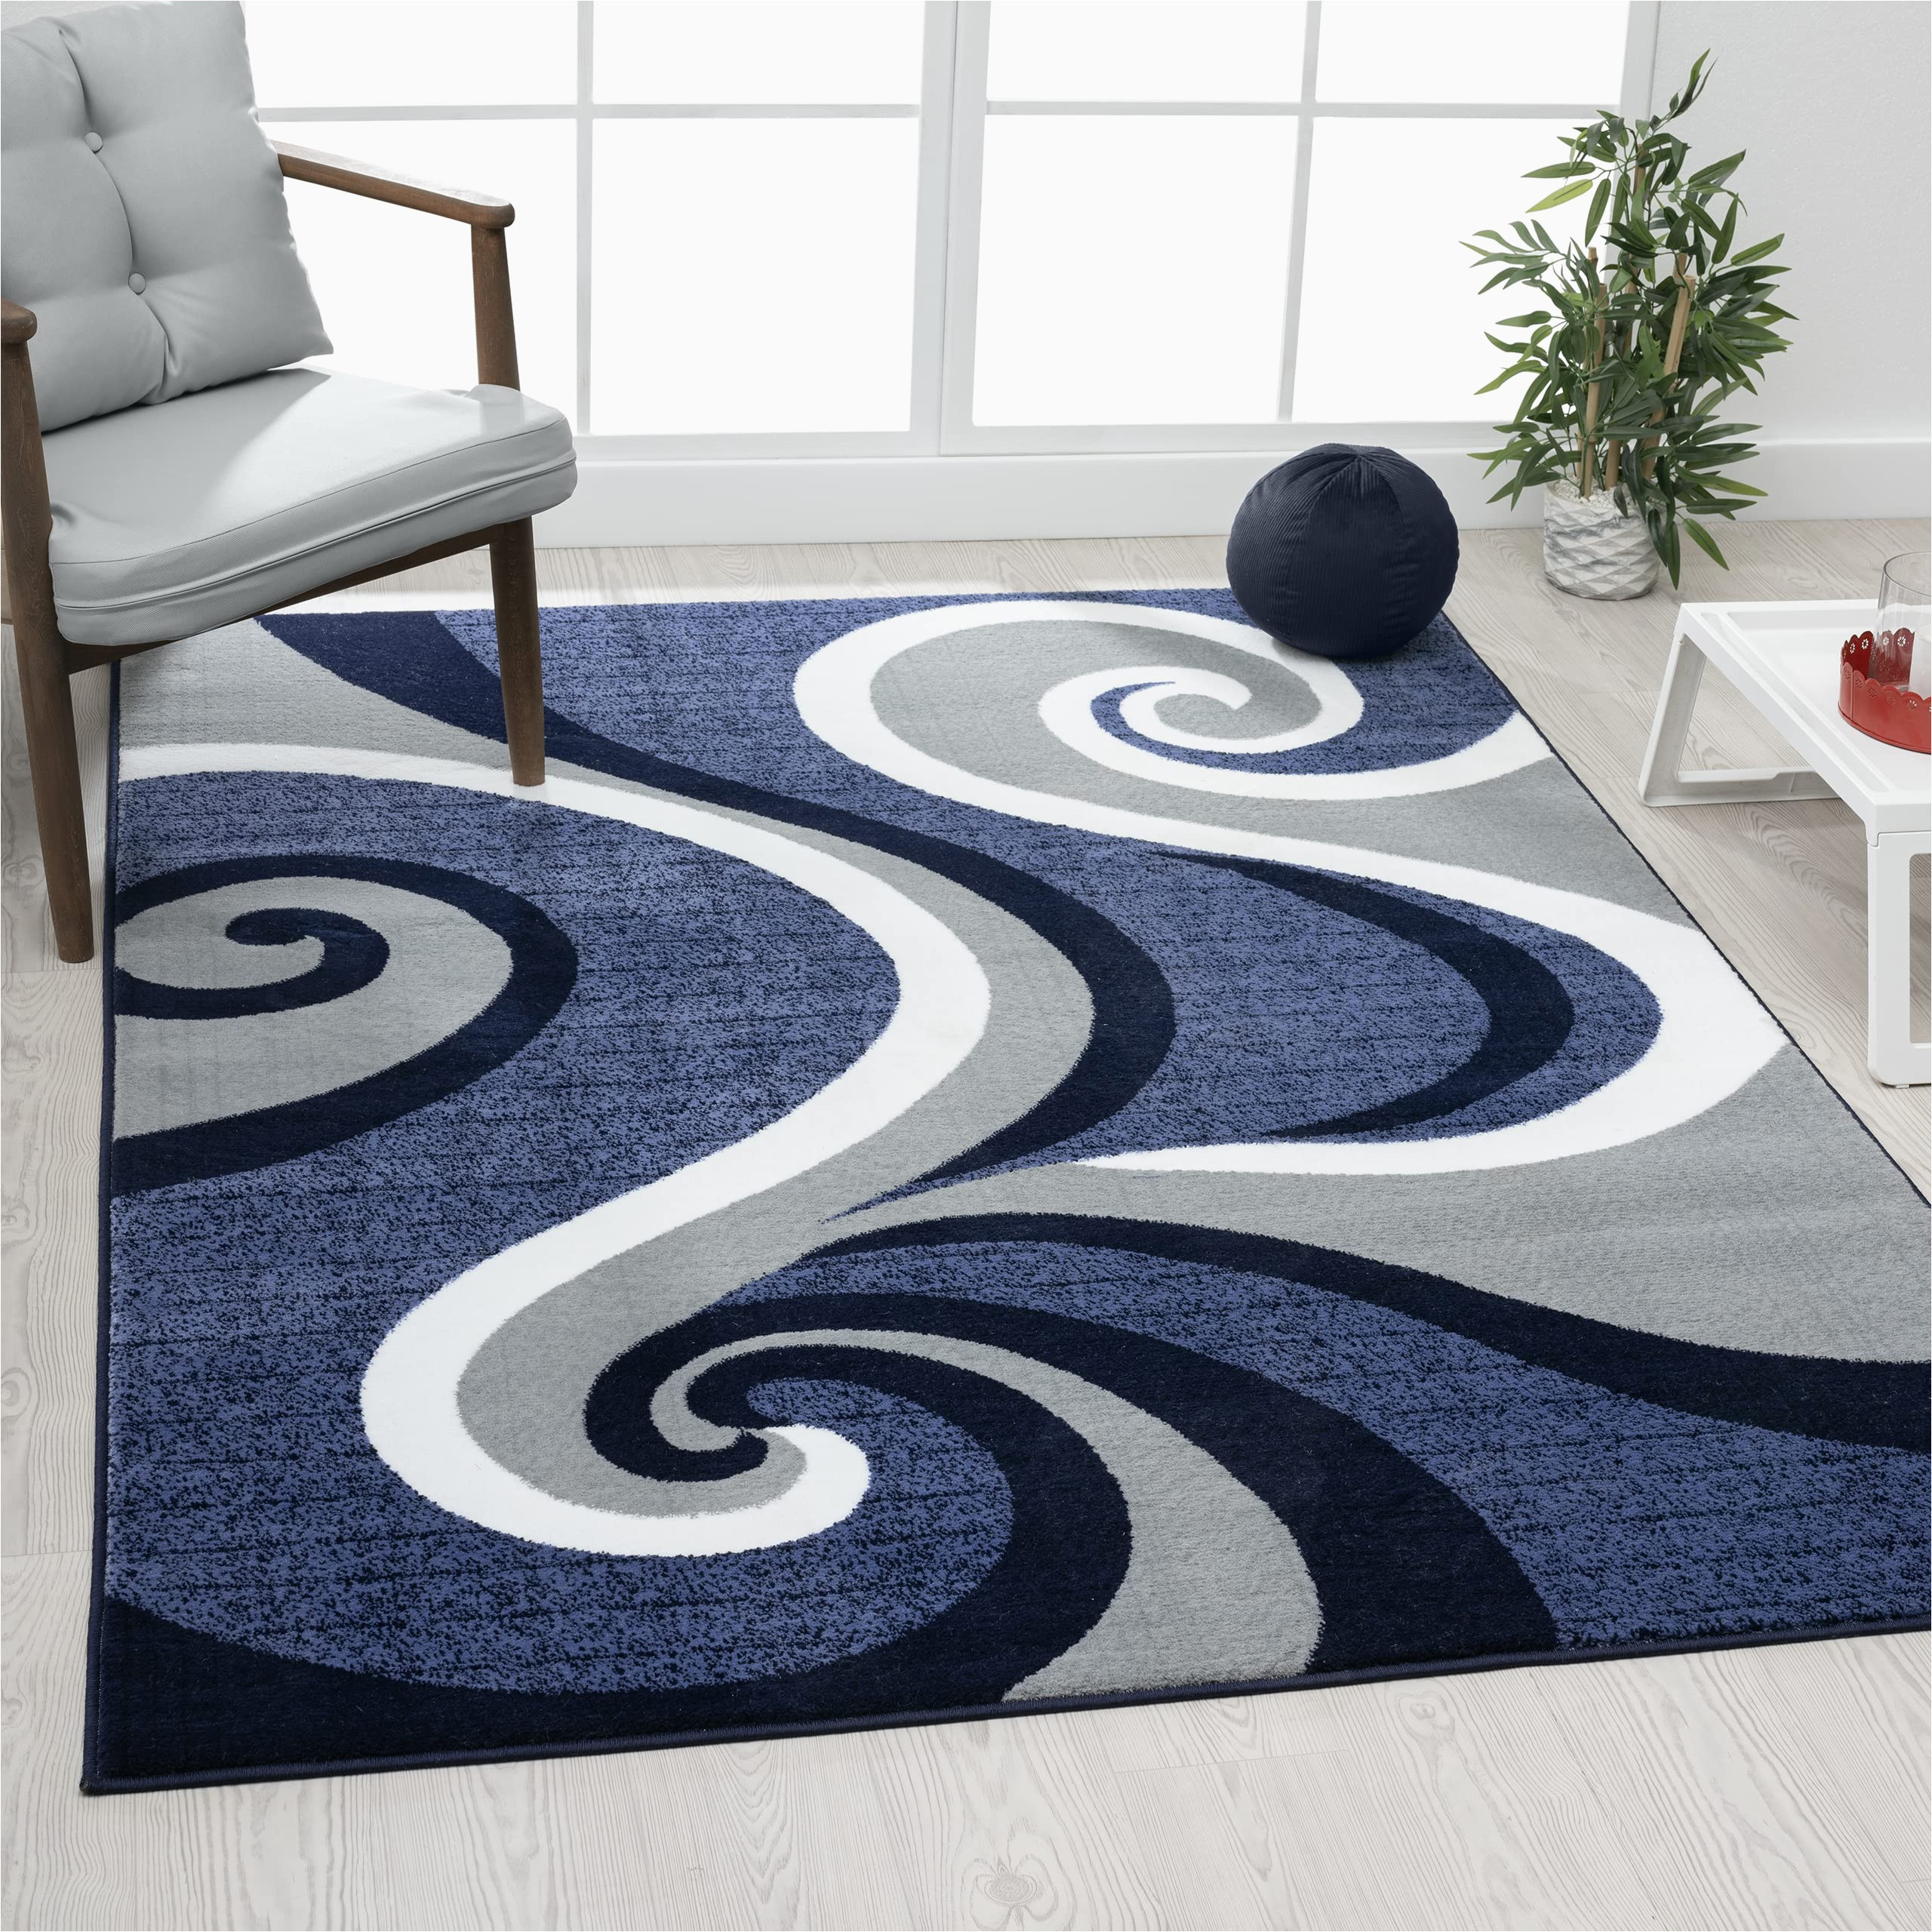 Grey Blue White Rug 0327 Blue White Gray 5 X 7 area Rug Abstract Carpet by Persian-rugs